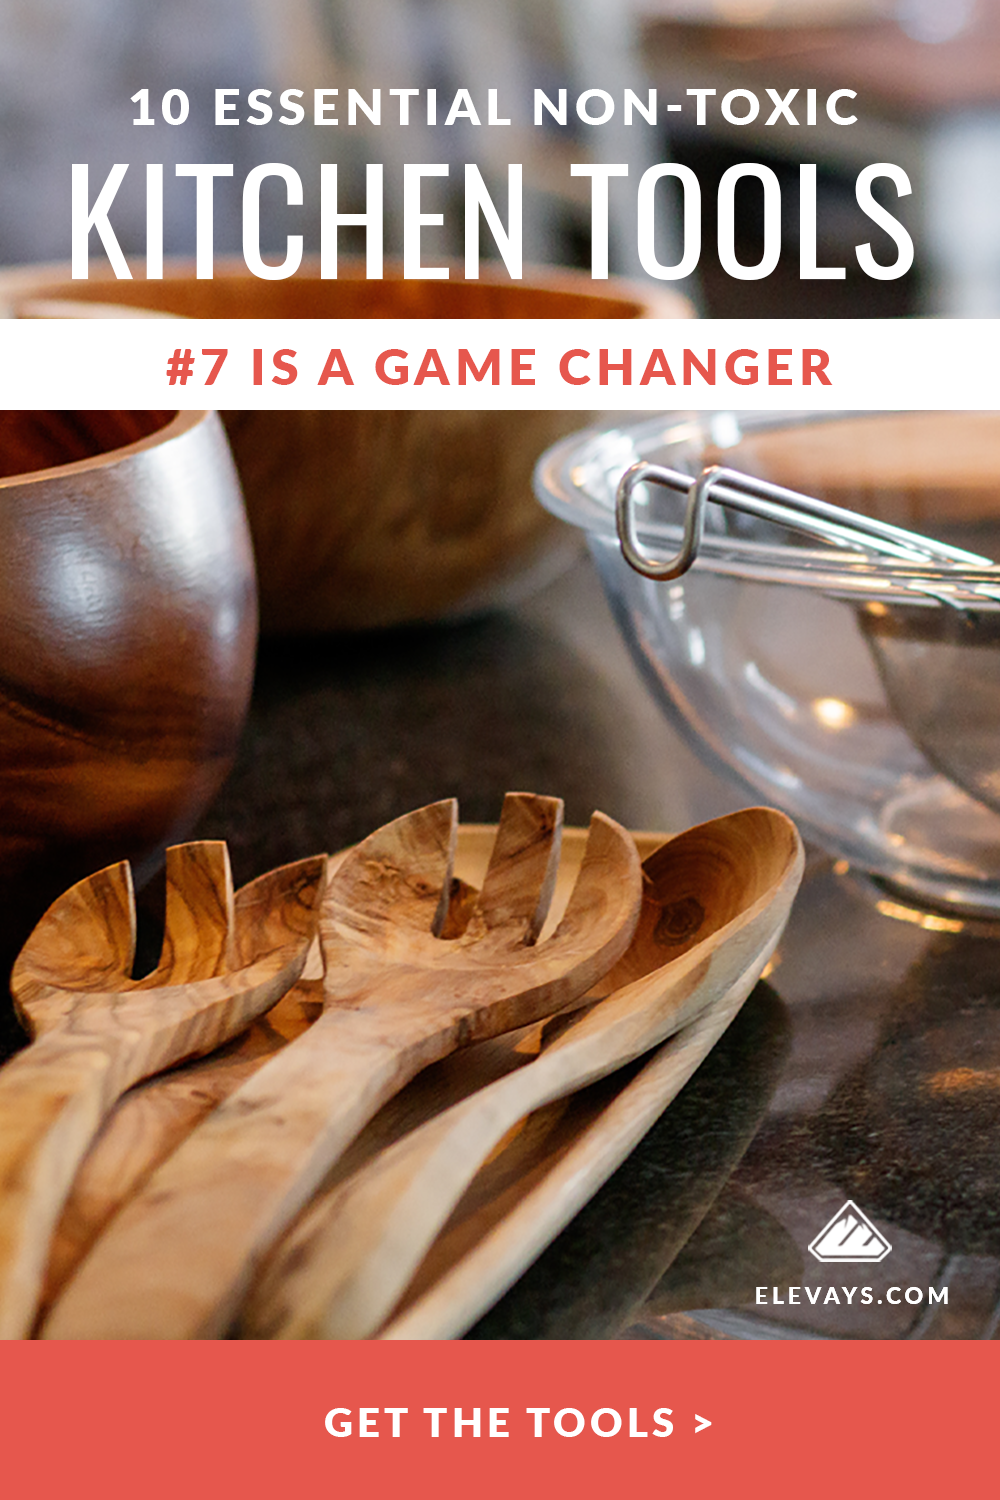 10 Essential Non-Toxic Kitchen Tools, Utensils & Safe Cookware